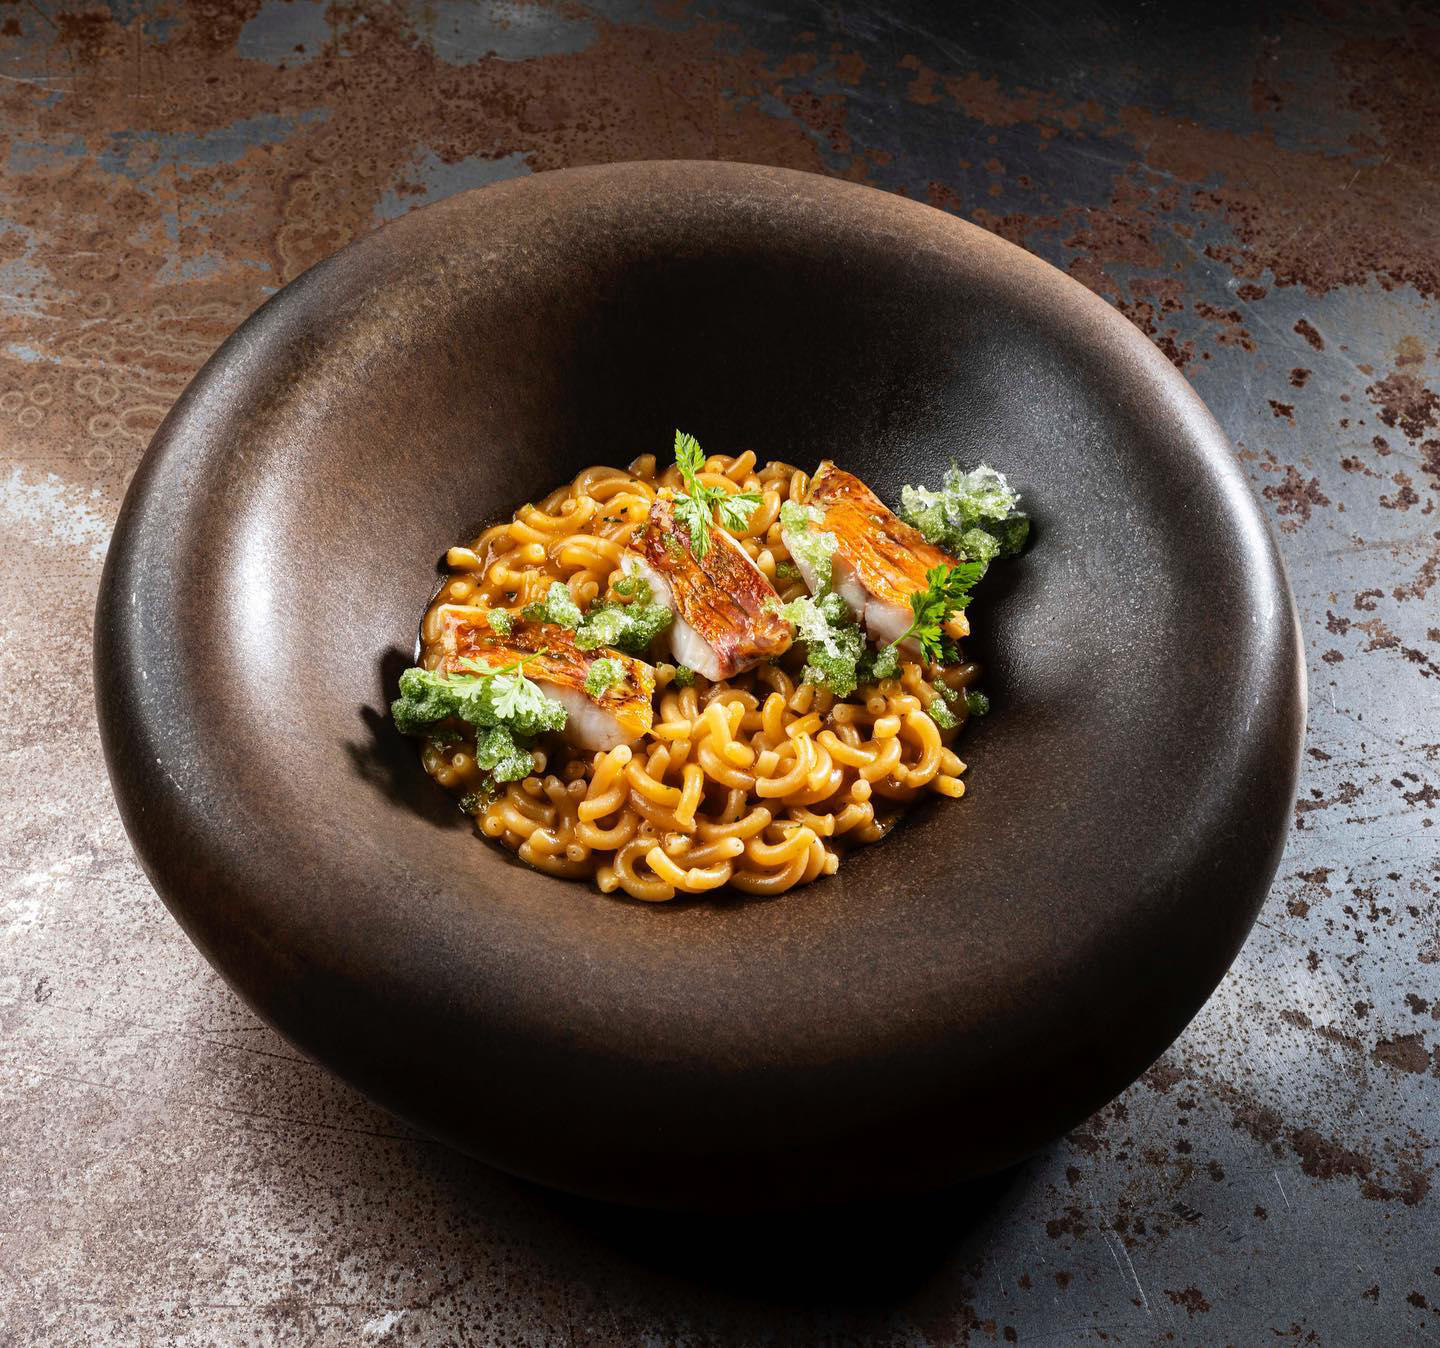 Excelsior Hotel Gallia, Milan - Today on #WorldPastaDay we present a very special dish from a la car